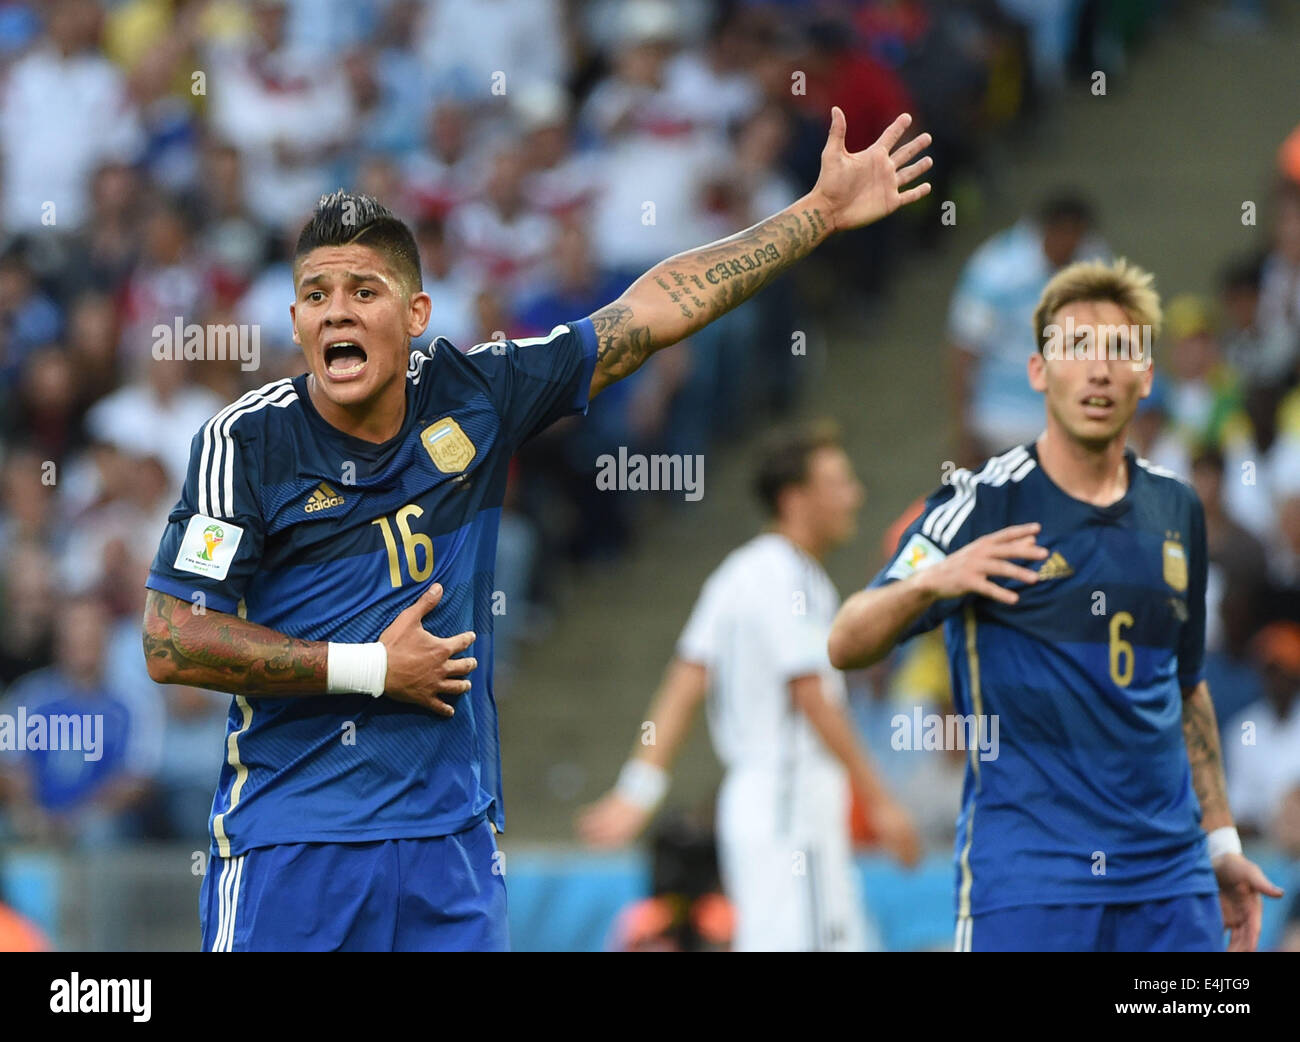 Rio De Janeiro, Brazil. 13th July, 2014. Argentina's Marcos Rojo (L) reacts during the final match between Germany and Argentina of 2014 FIFA World Cup at the Estadio do Maracana Stadium in Rio de Janeiro, Brazil, on July 13, 2014. Credit:  Liu Dawei/Xinhua/Alamy Live News Stock Photo